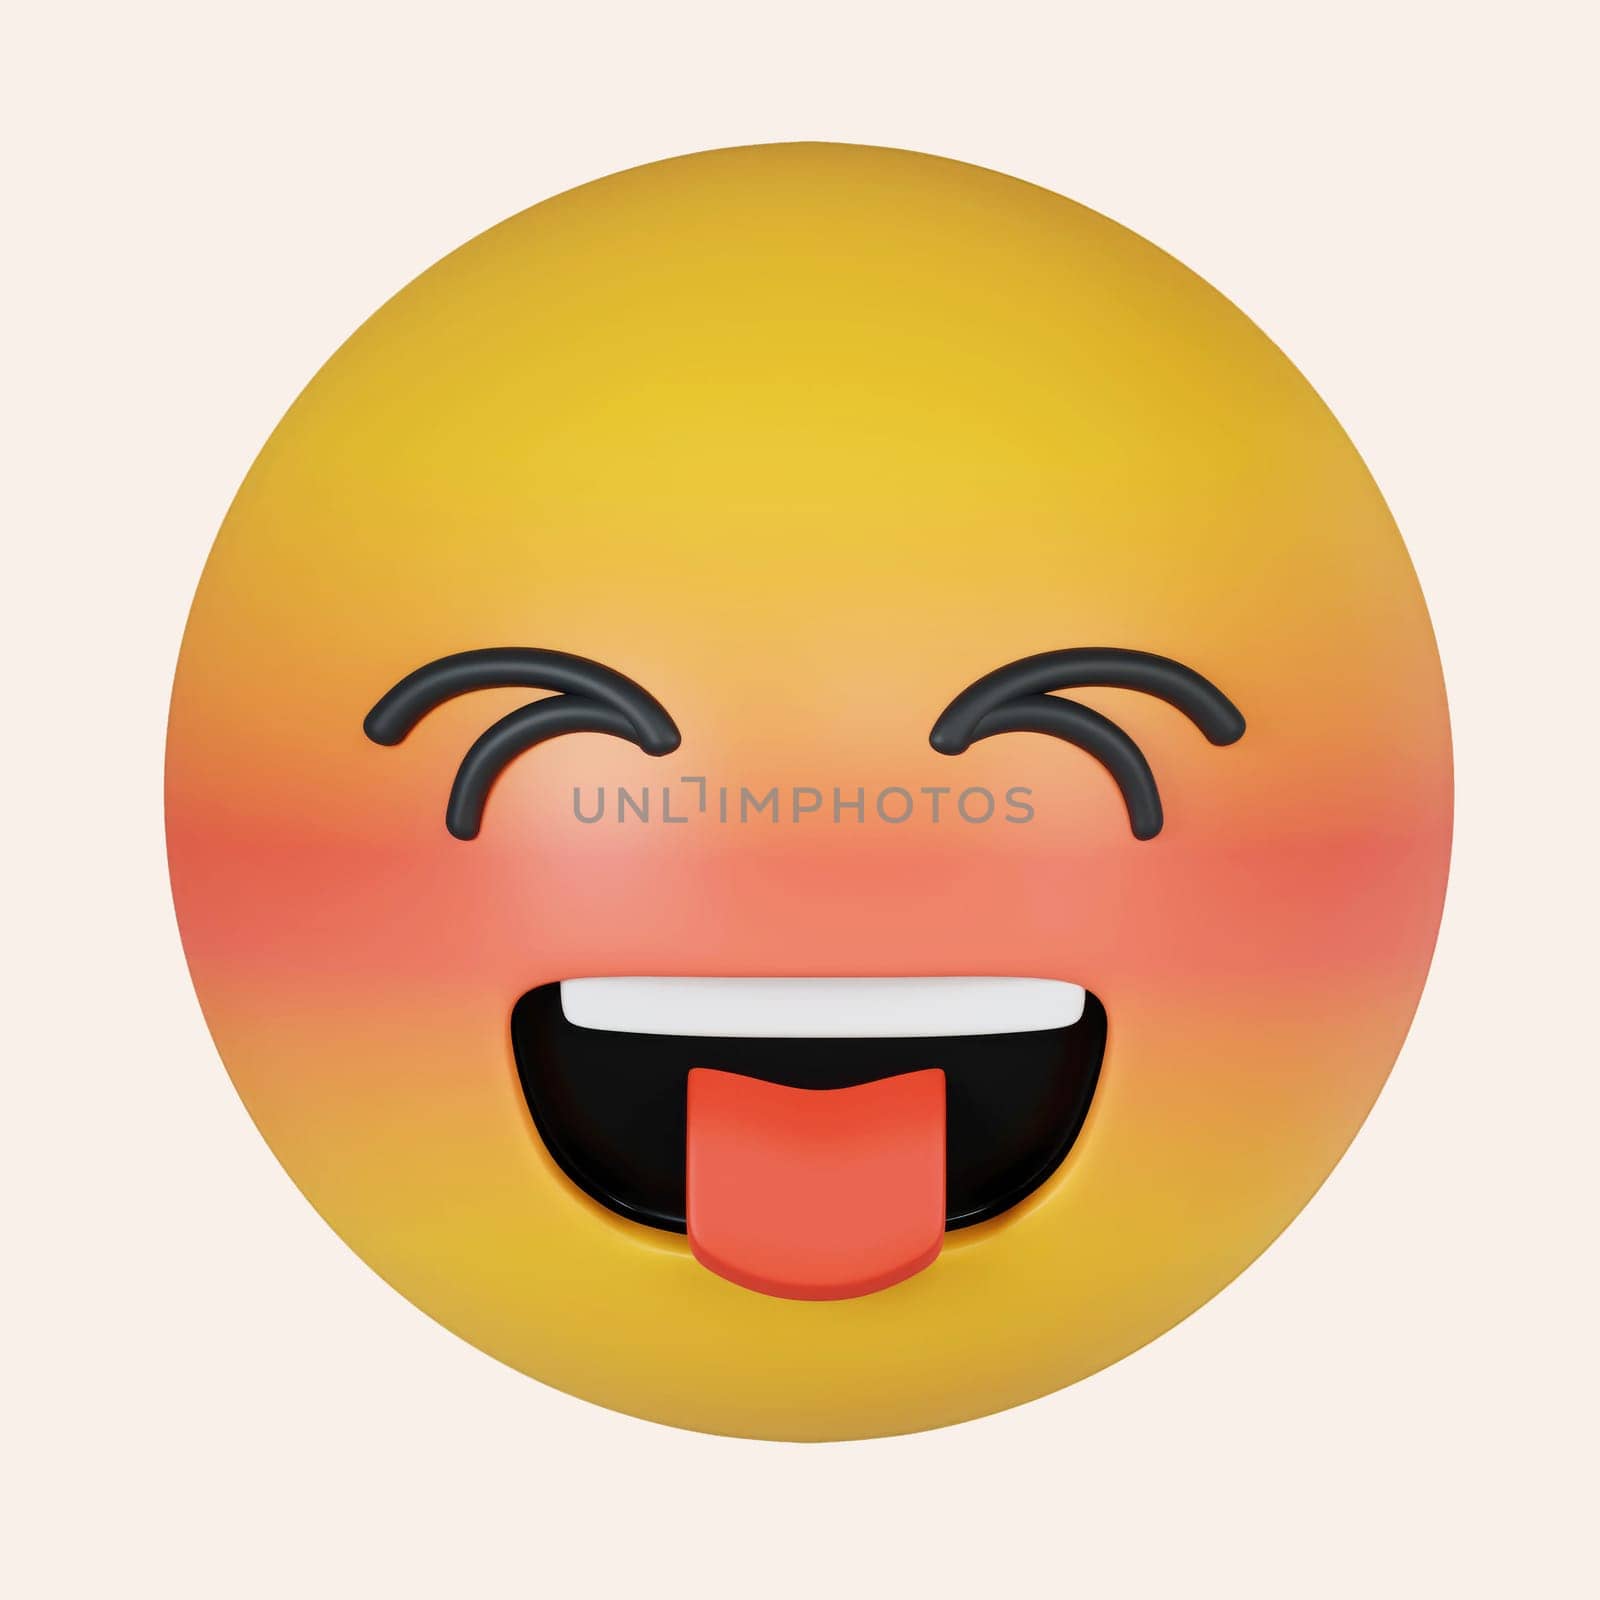 3d Woozy Emoji Face, drunk emoticon, tired emotion. icon isolated on gray background. 3d rendering illustration. Clipping path..